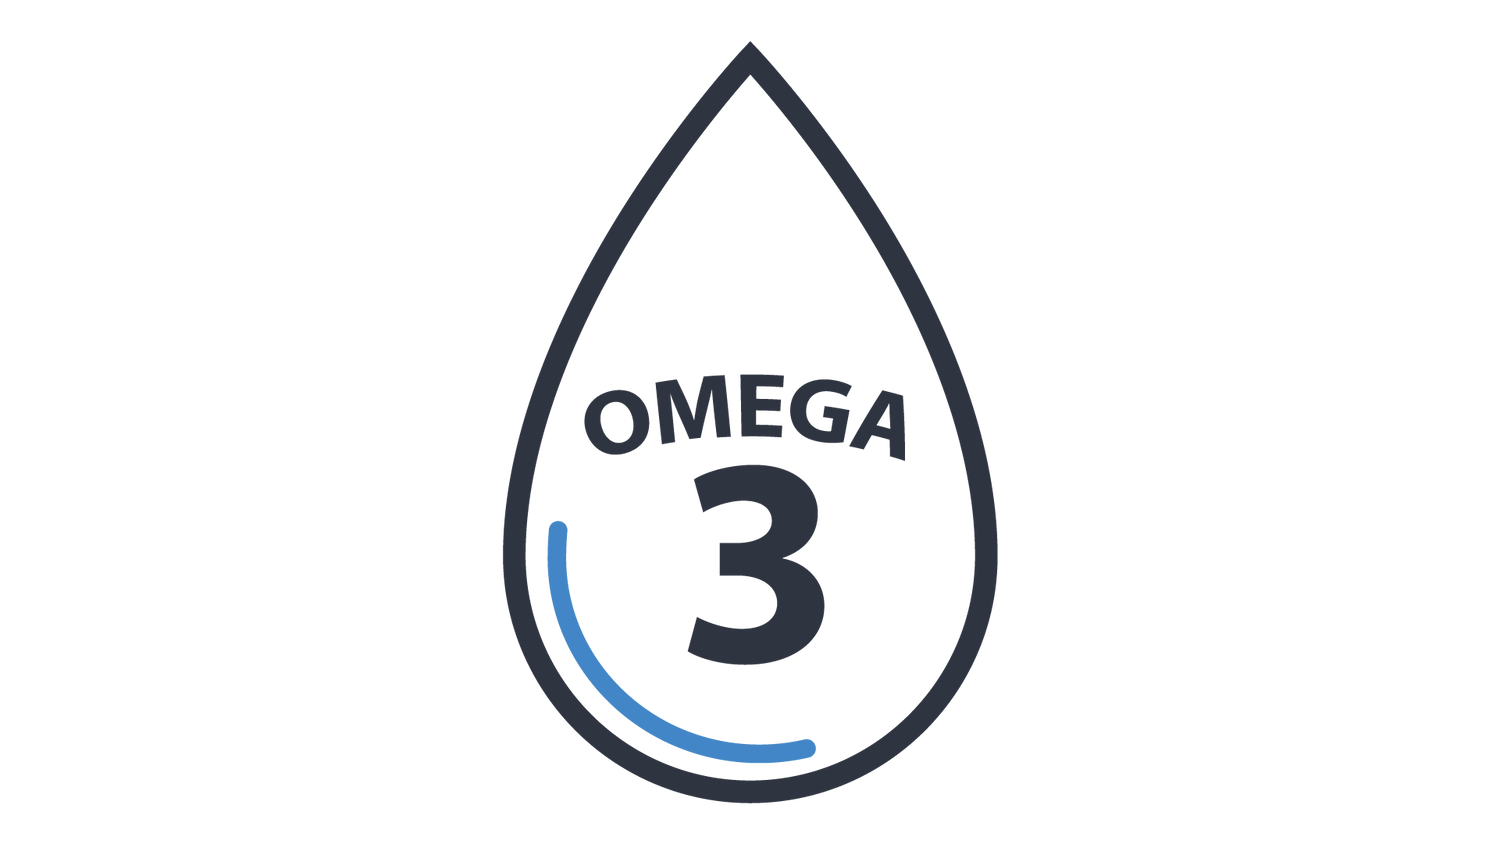 Icon of a water droplet with the text “OMEGA 3